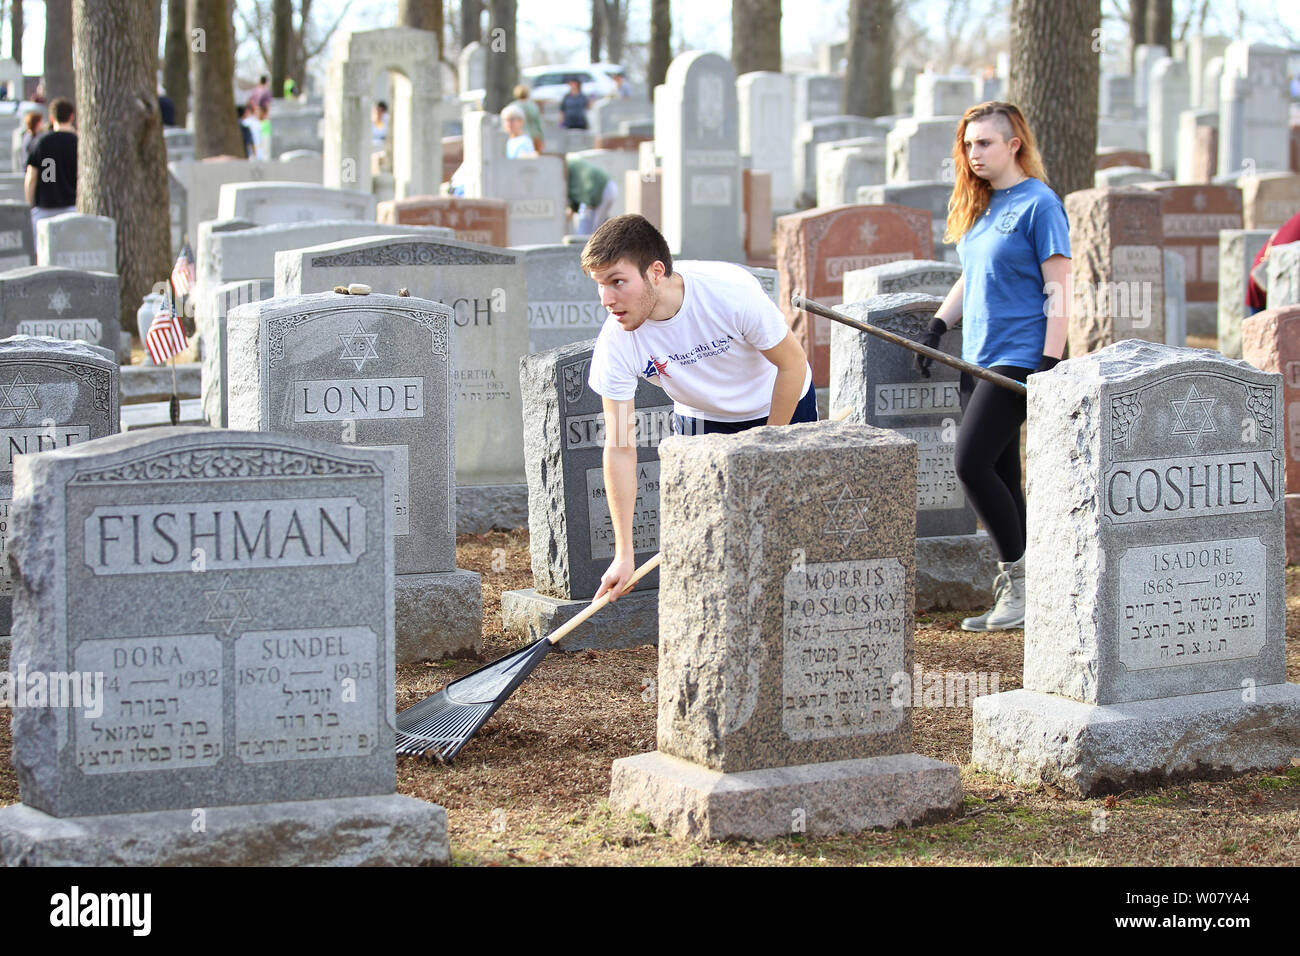 Volunteers rake up old leaves at Chesed Shel Emeth Cemetery in University City, Missouri on February 22, 2017. Vandals toppled nearly 200 headstones on February 20, 2017 prompting the community cleanup effort that attracted over four thousand people.  Photo by Bill Greenblatt/UPI Stock Photo